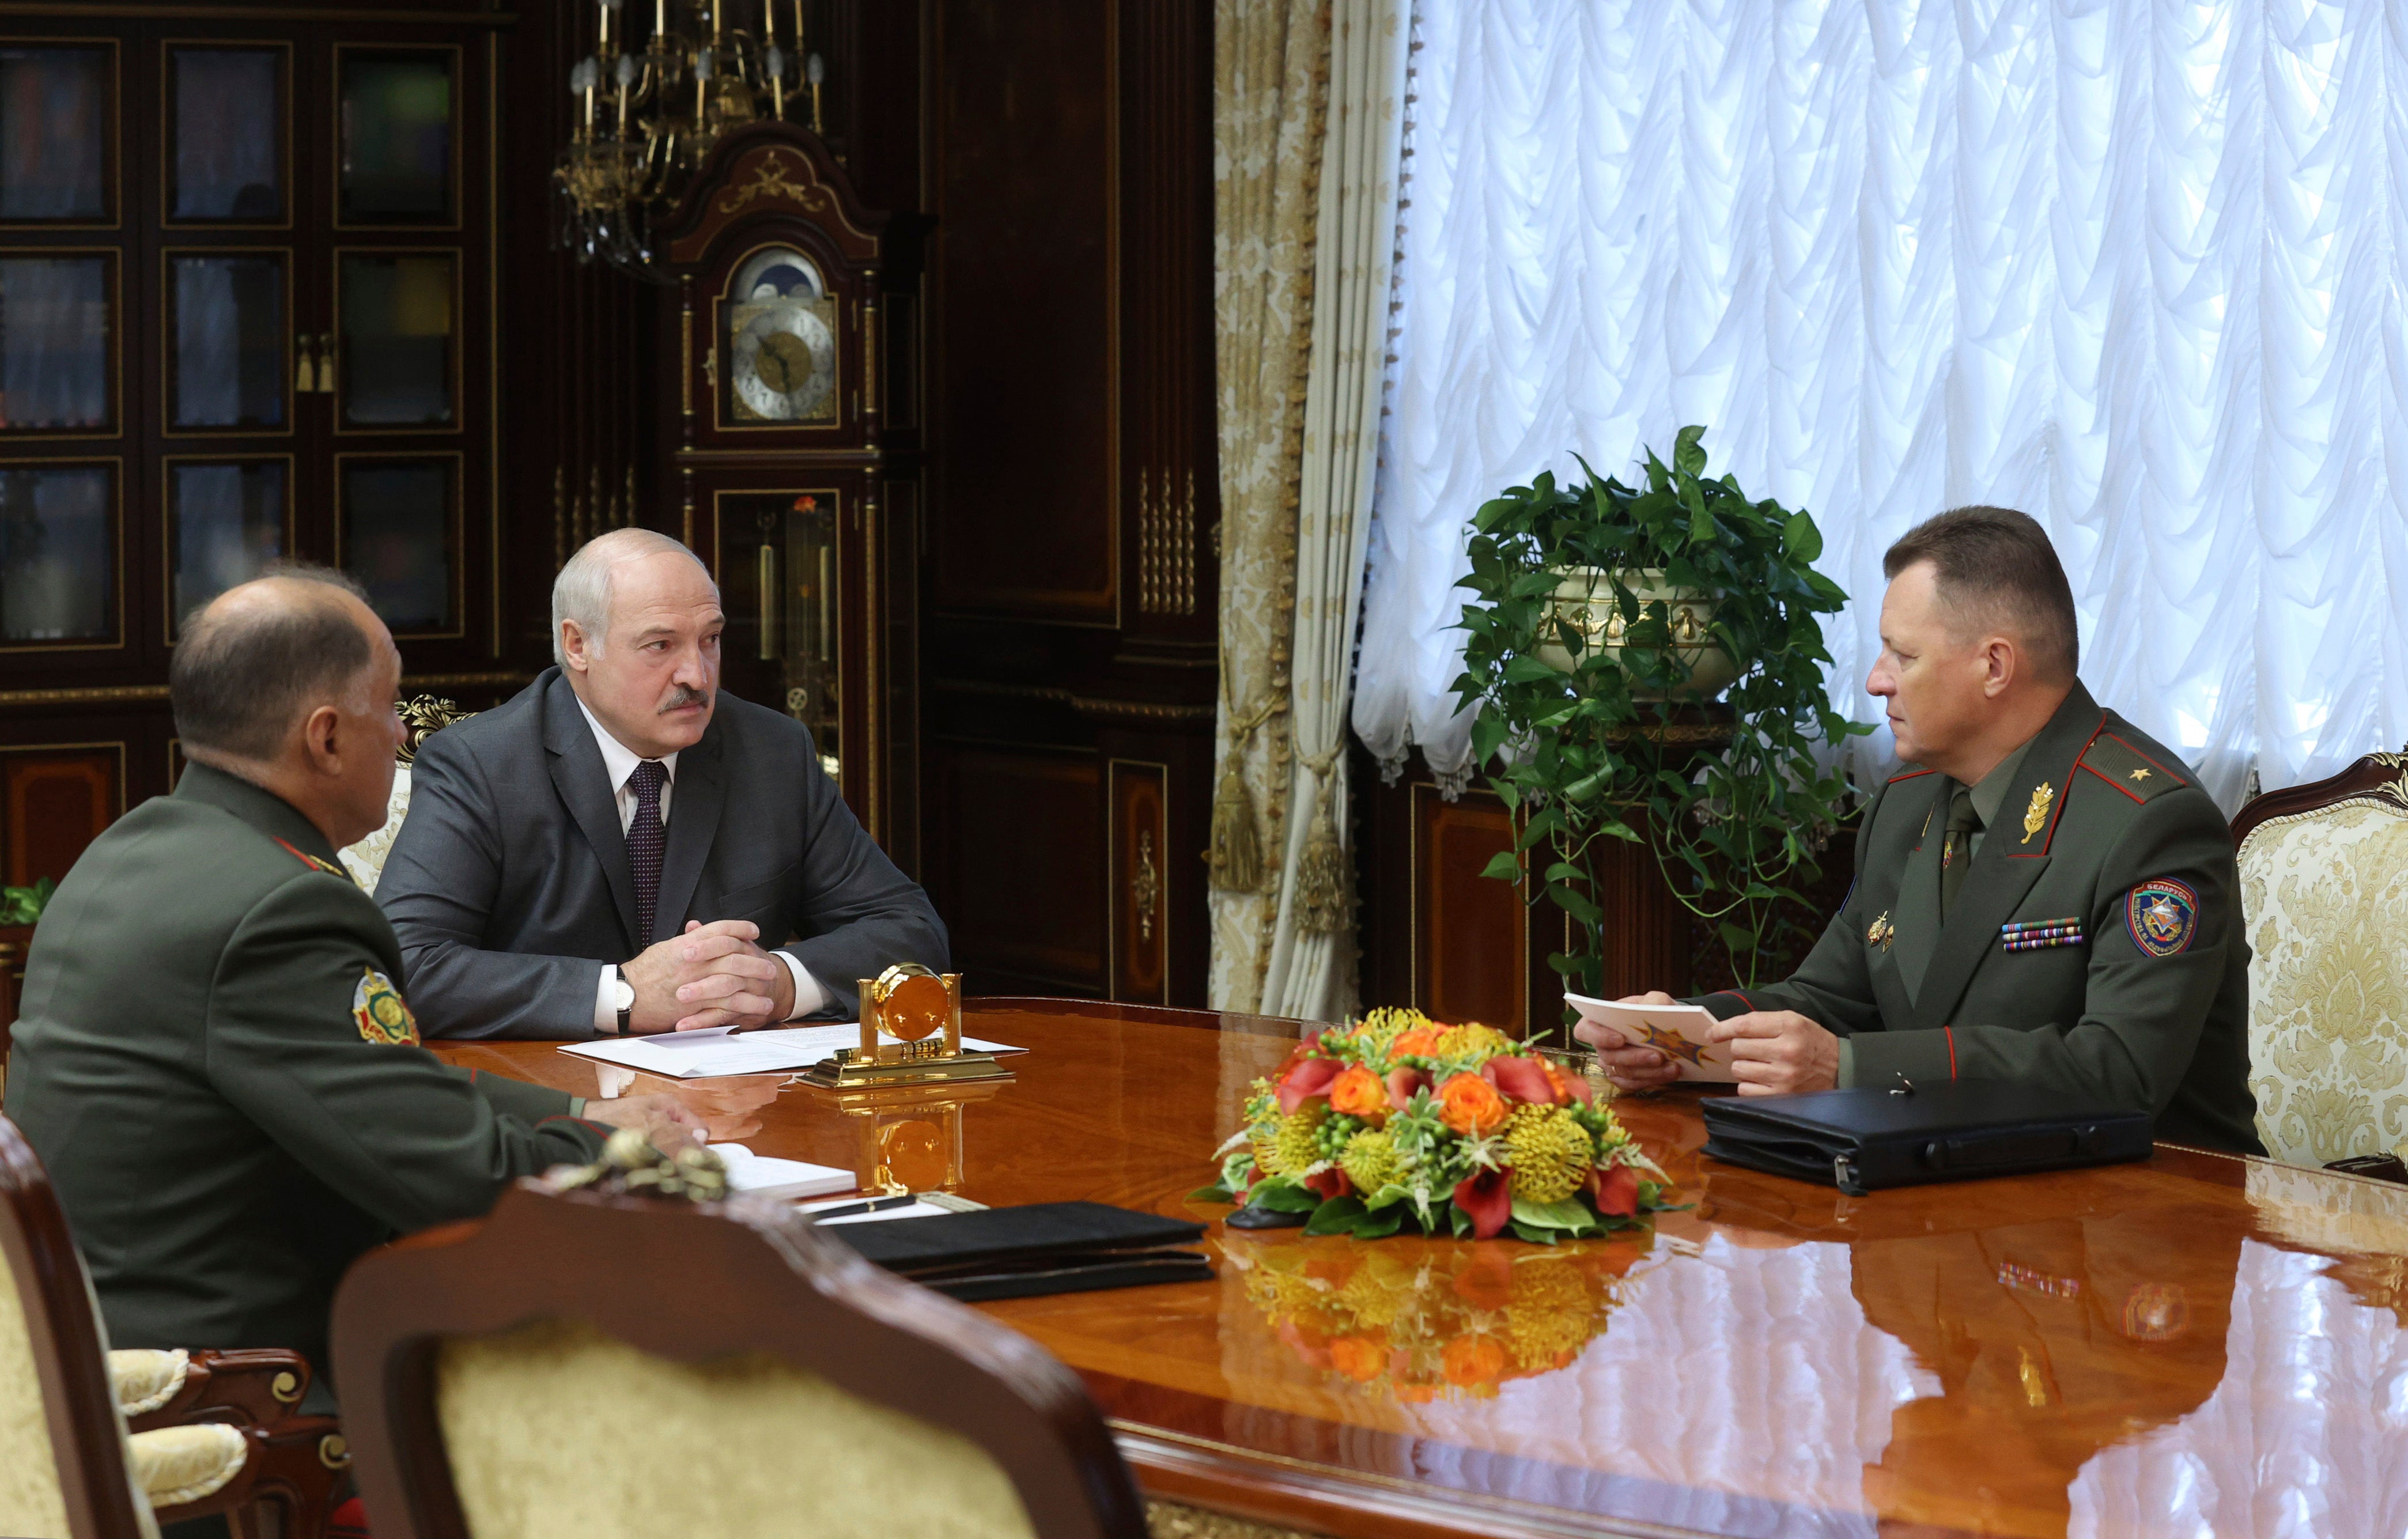 Belarusian president Alexander Lukashenko, centre, held a meeting in Minsk with security officials on Monday